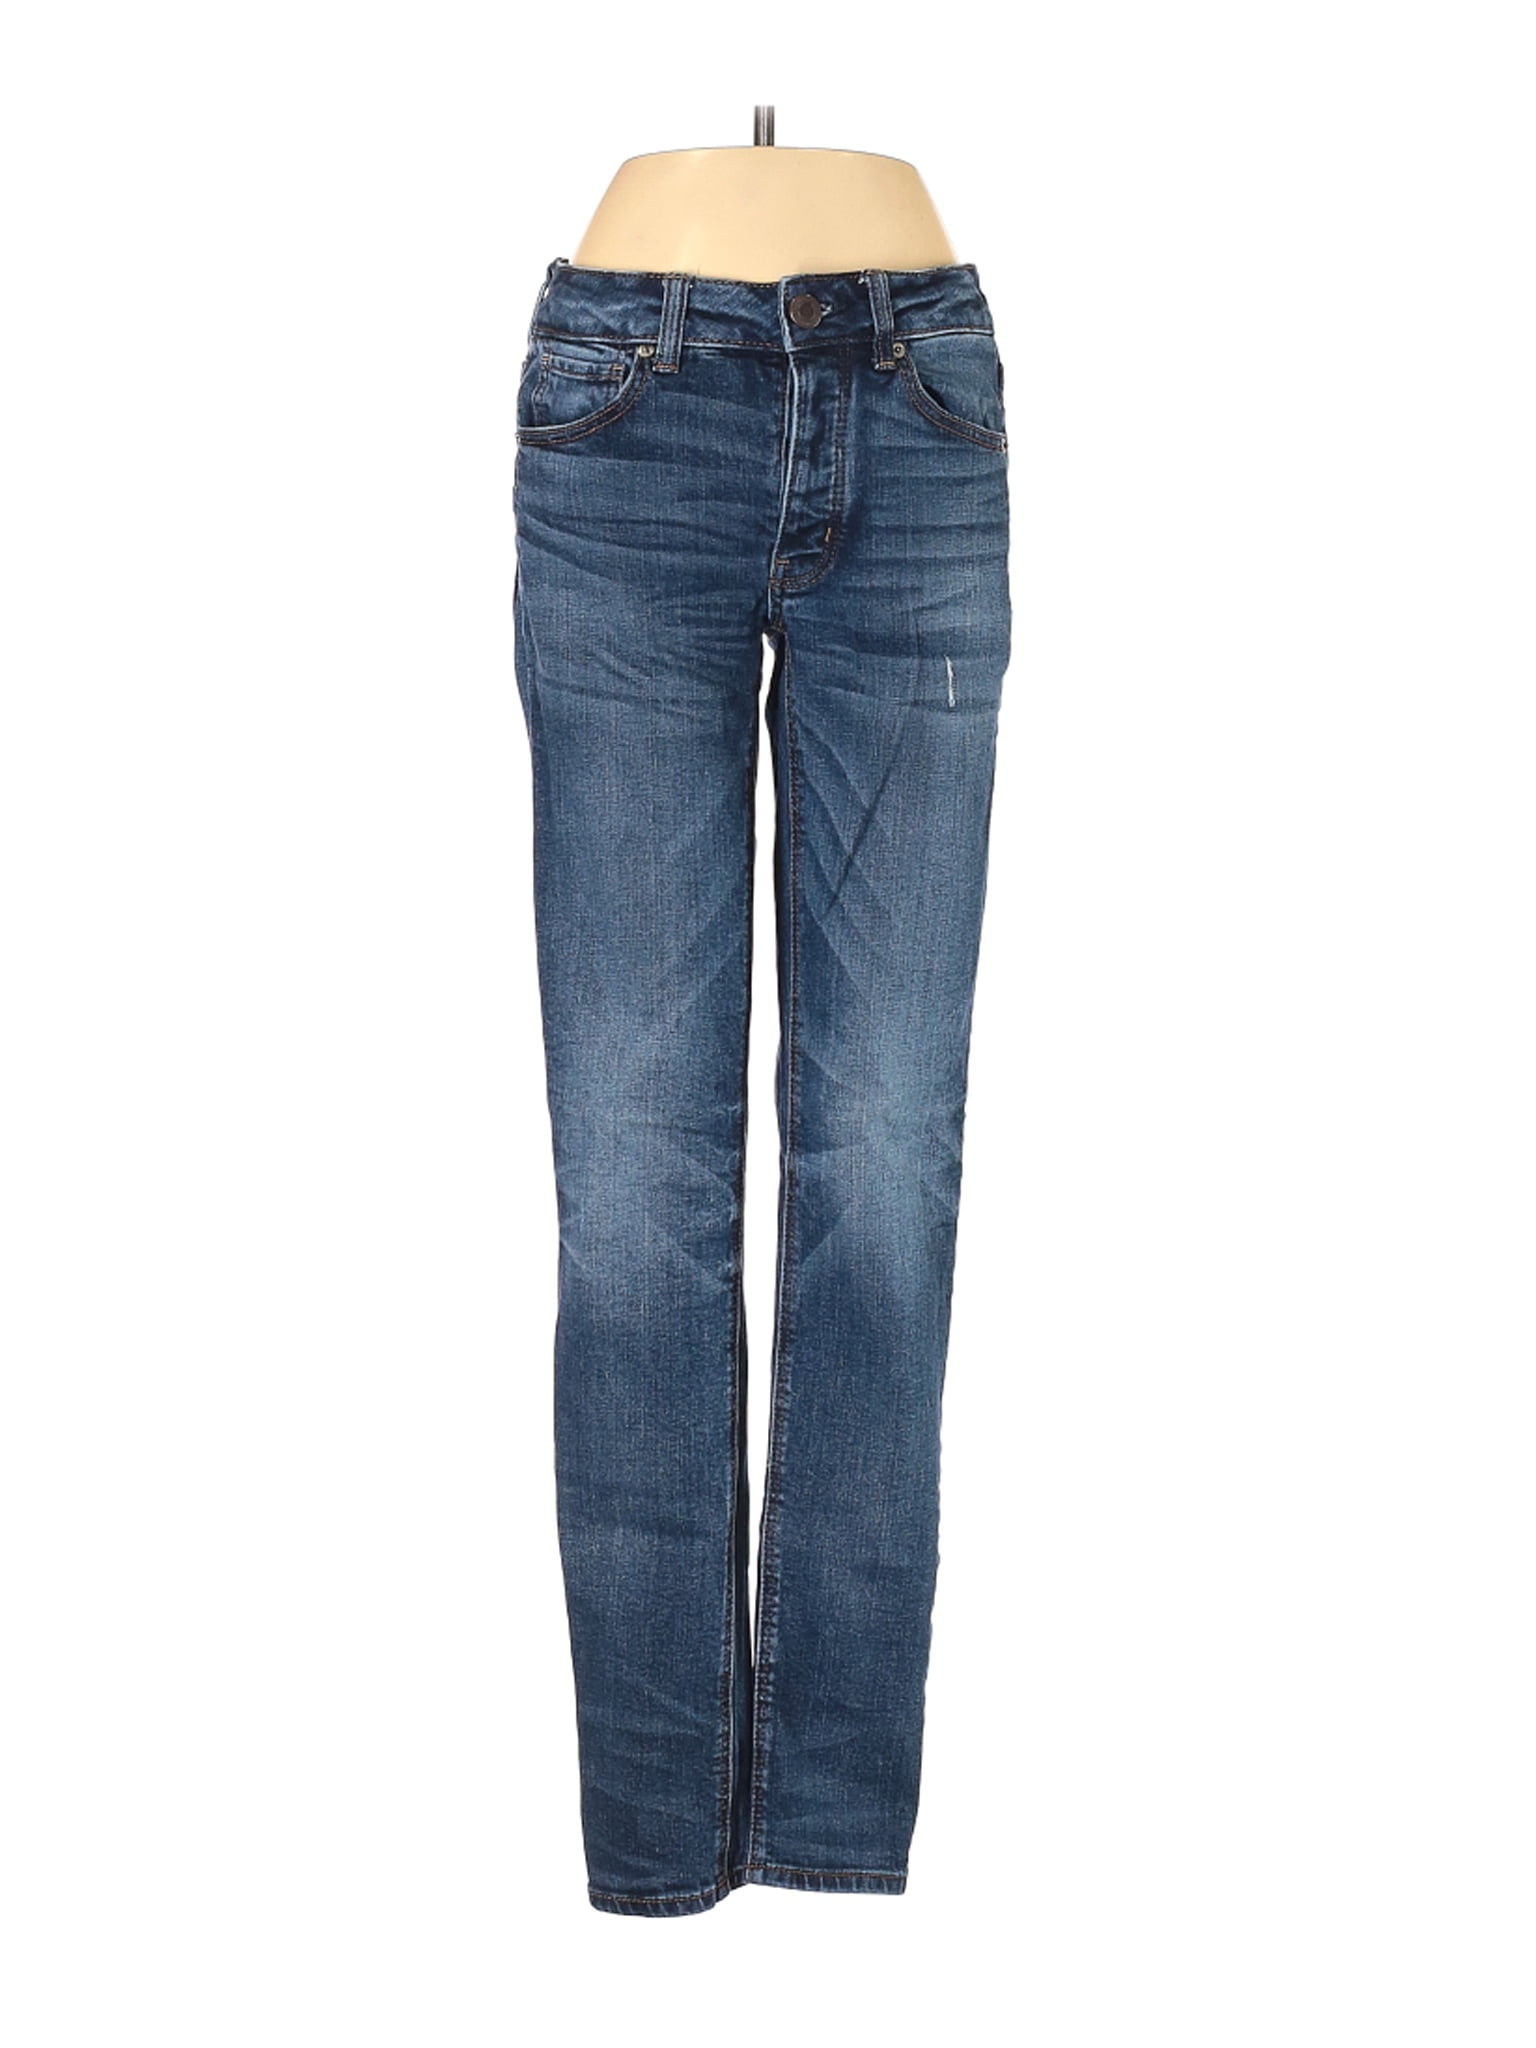 american eagle women's tall jeans